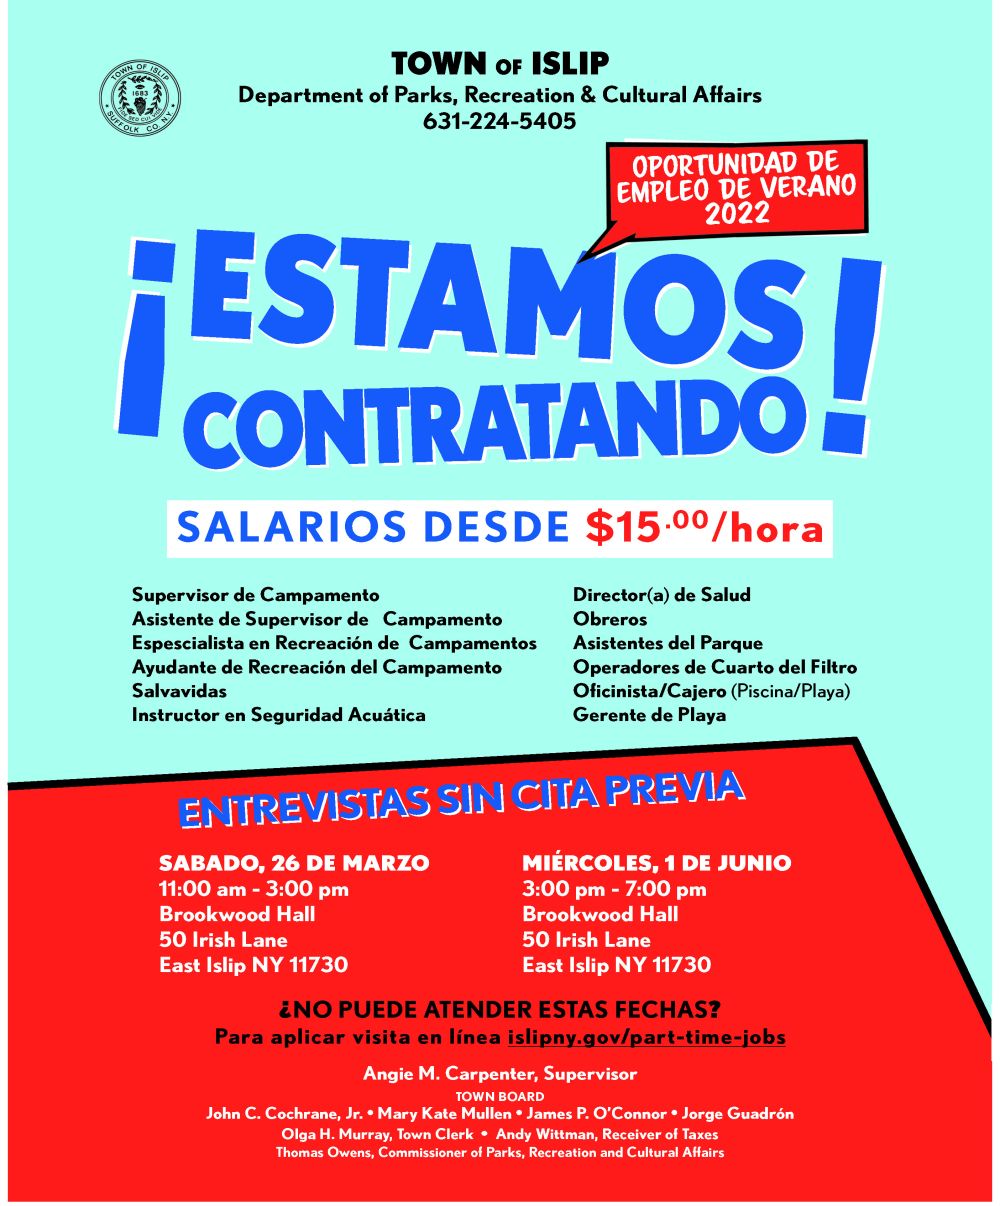 spanish version of flyer, call 631-224-5405